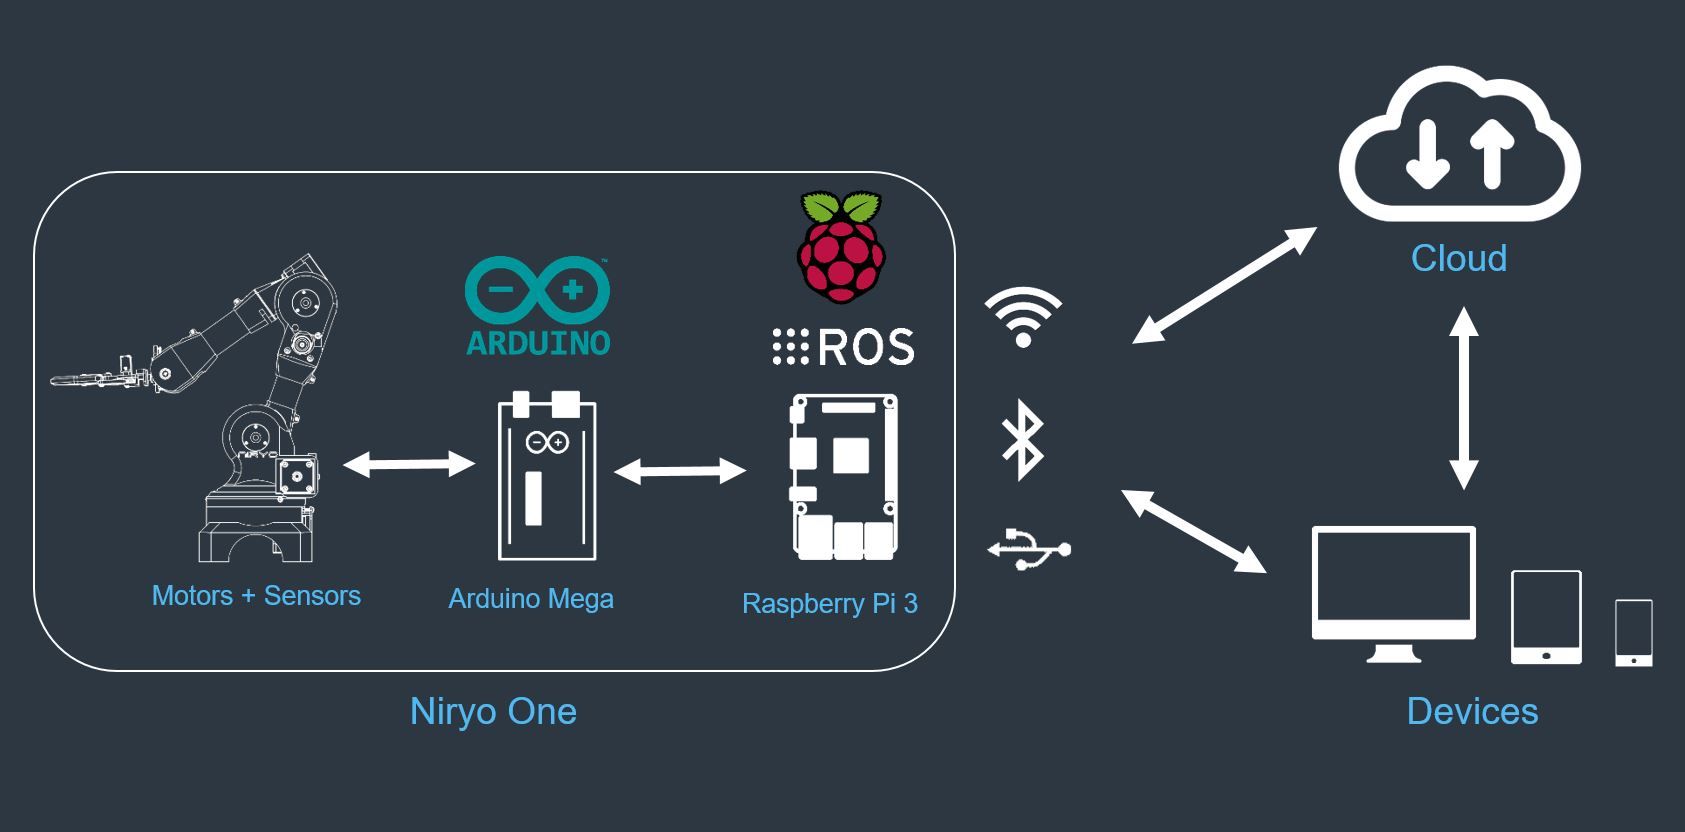 robot as a service - iot - connected objects